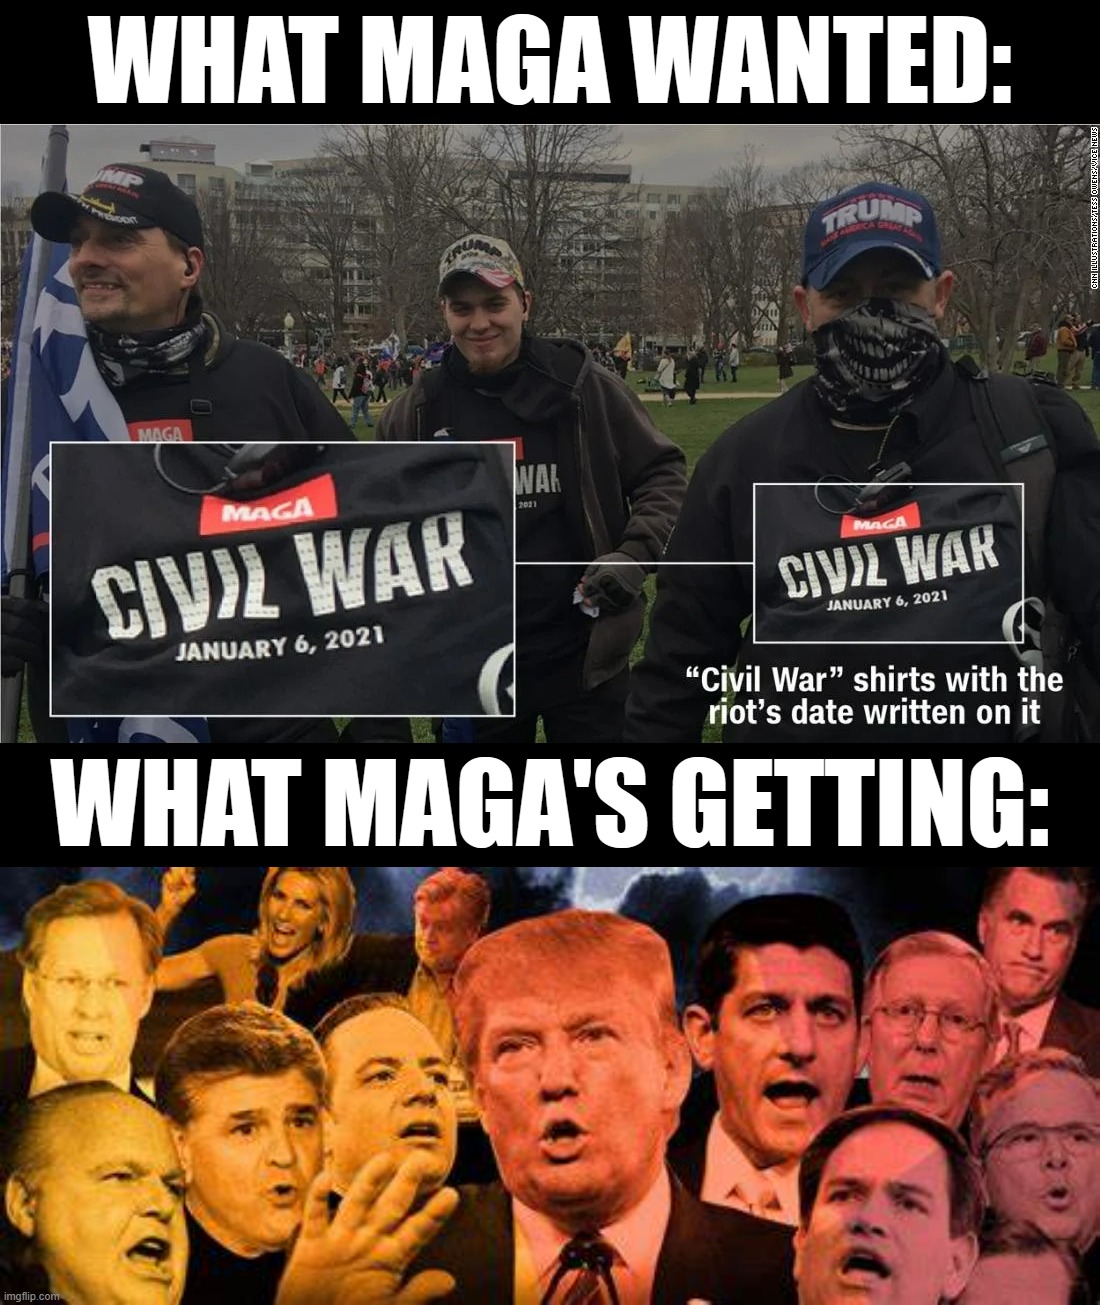 They wanted a Civil War. And they'll get a civil war, alright - within the Republican Party. | WHAT MAGA WANTED:; WHAT MAGA'S GETTING: | image tagged in maga riot symbols civil war,republican civil war,republicans,republican party,gop,civil war | made w/ Imgflip meme maker